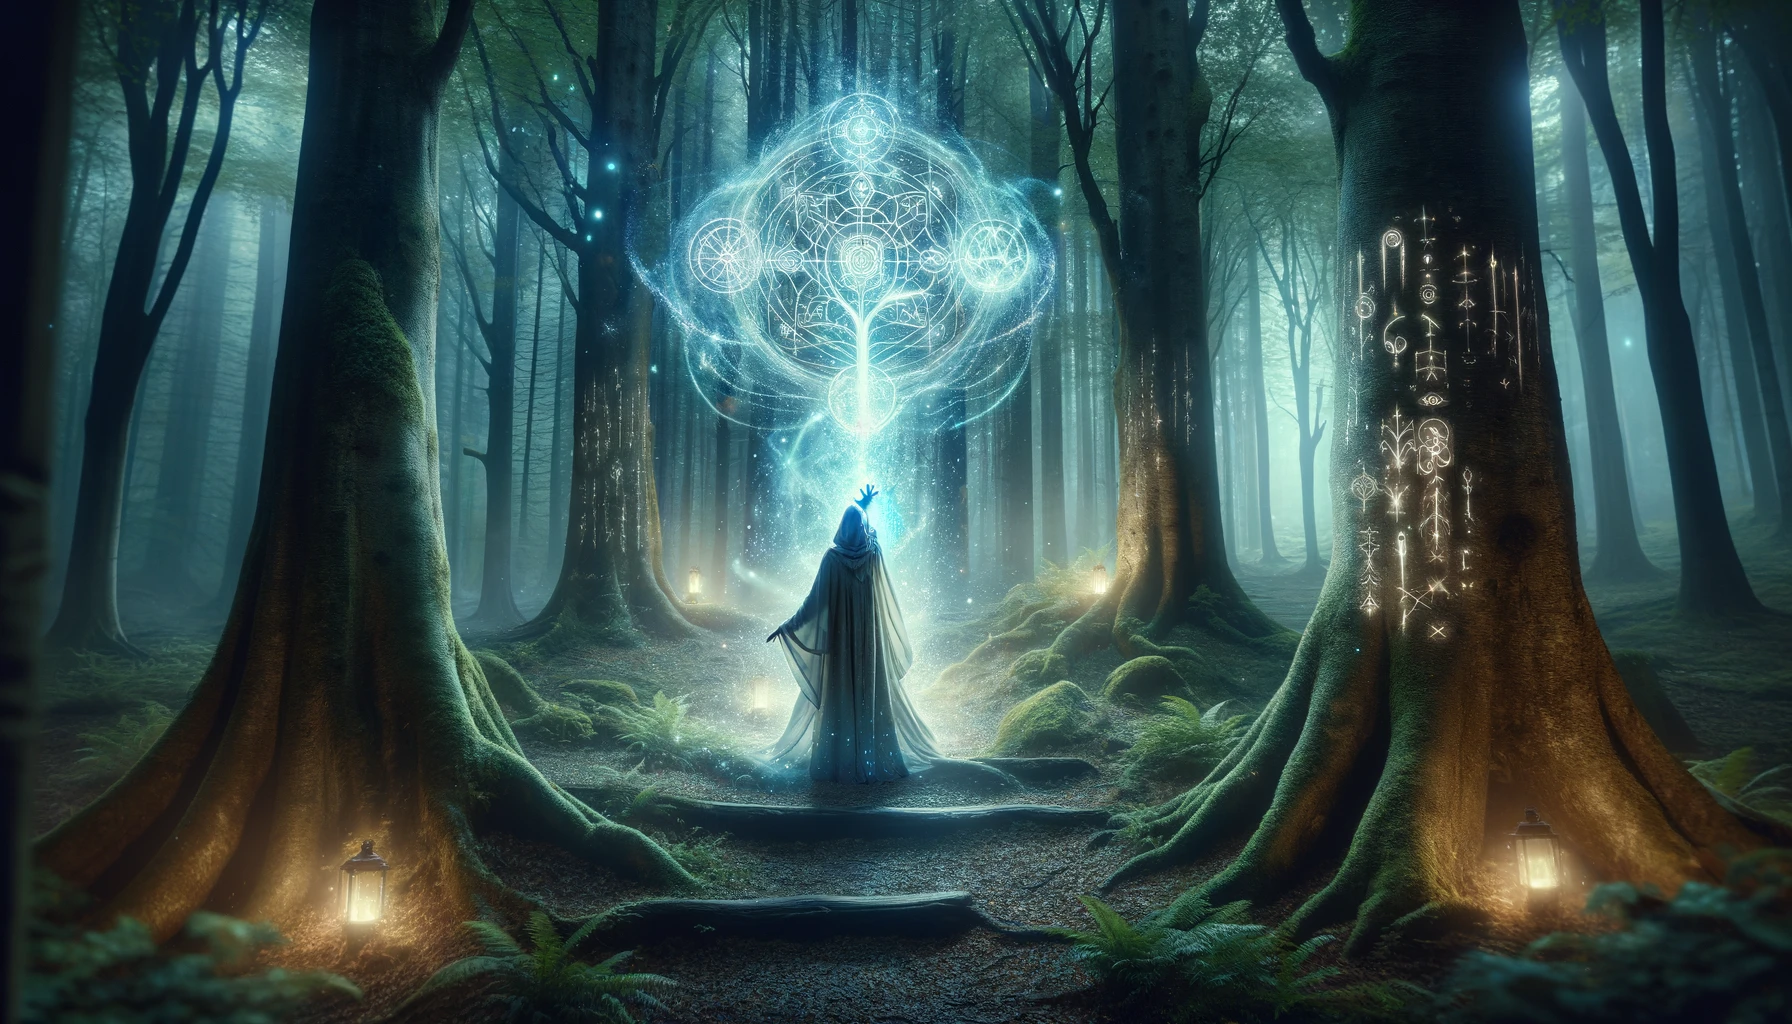 Mystical figure in a magical forest, offering enchantment amidst ancient, glowing trees.